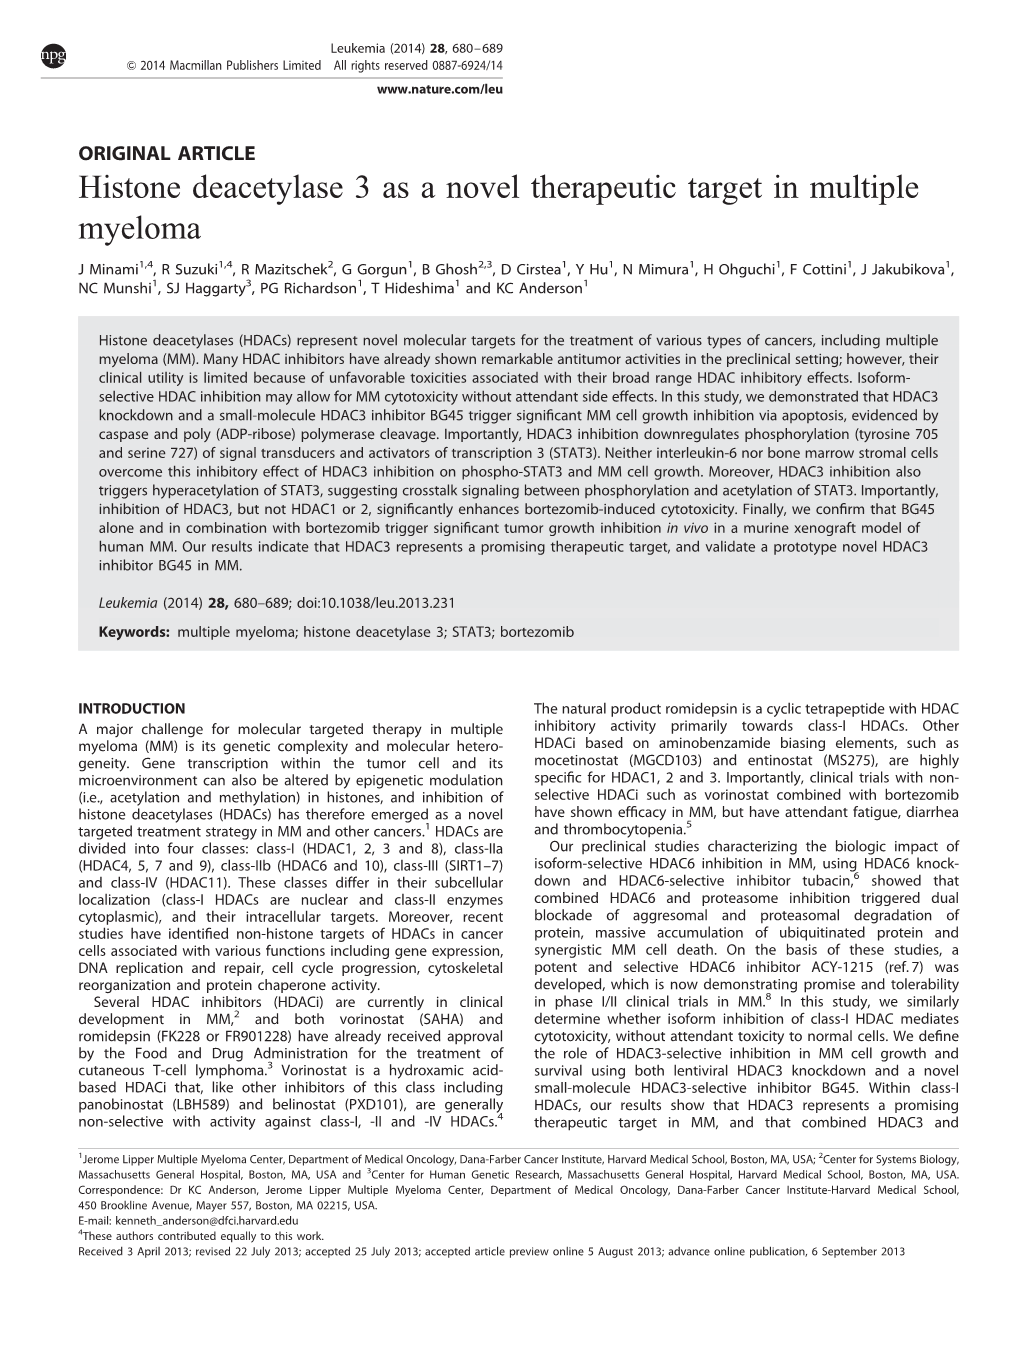 Histone Deacetylase 3 As a Novel Therapeutic Target in Multiple Myeloma